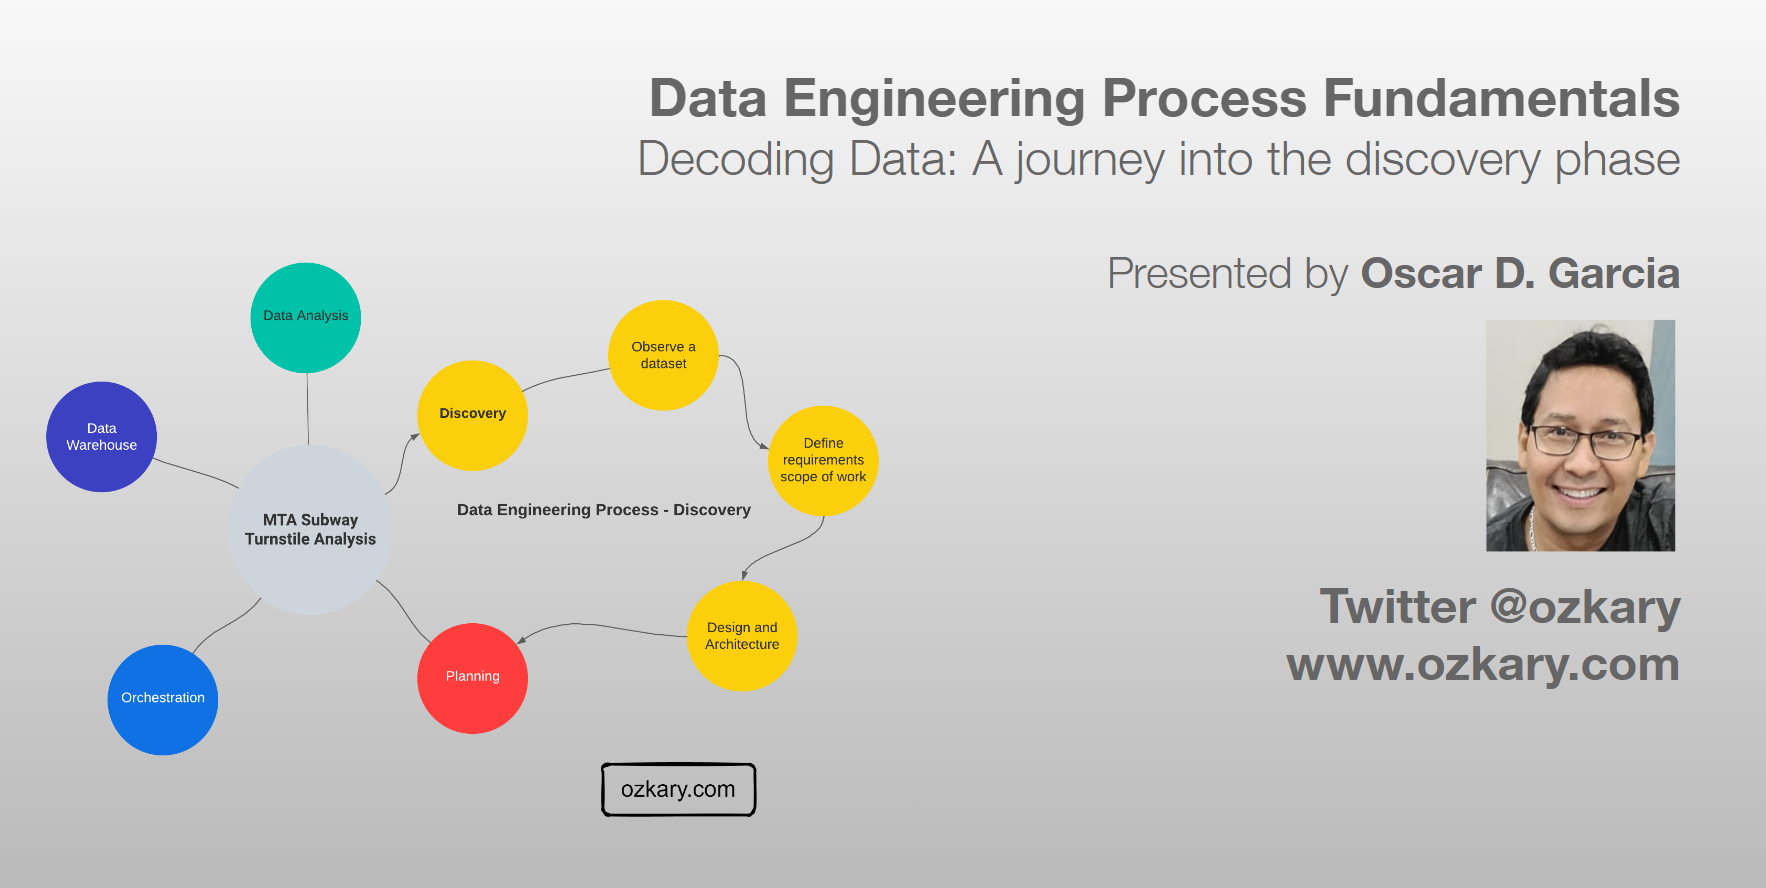 Decoding Data: A Journey into the Discovery Phase - Data Engineering Process Fundamentals